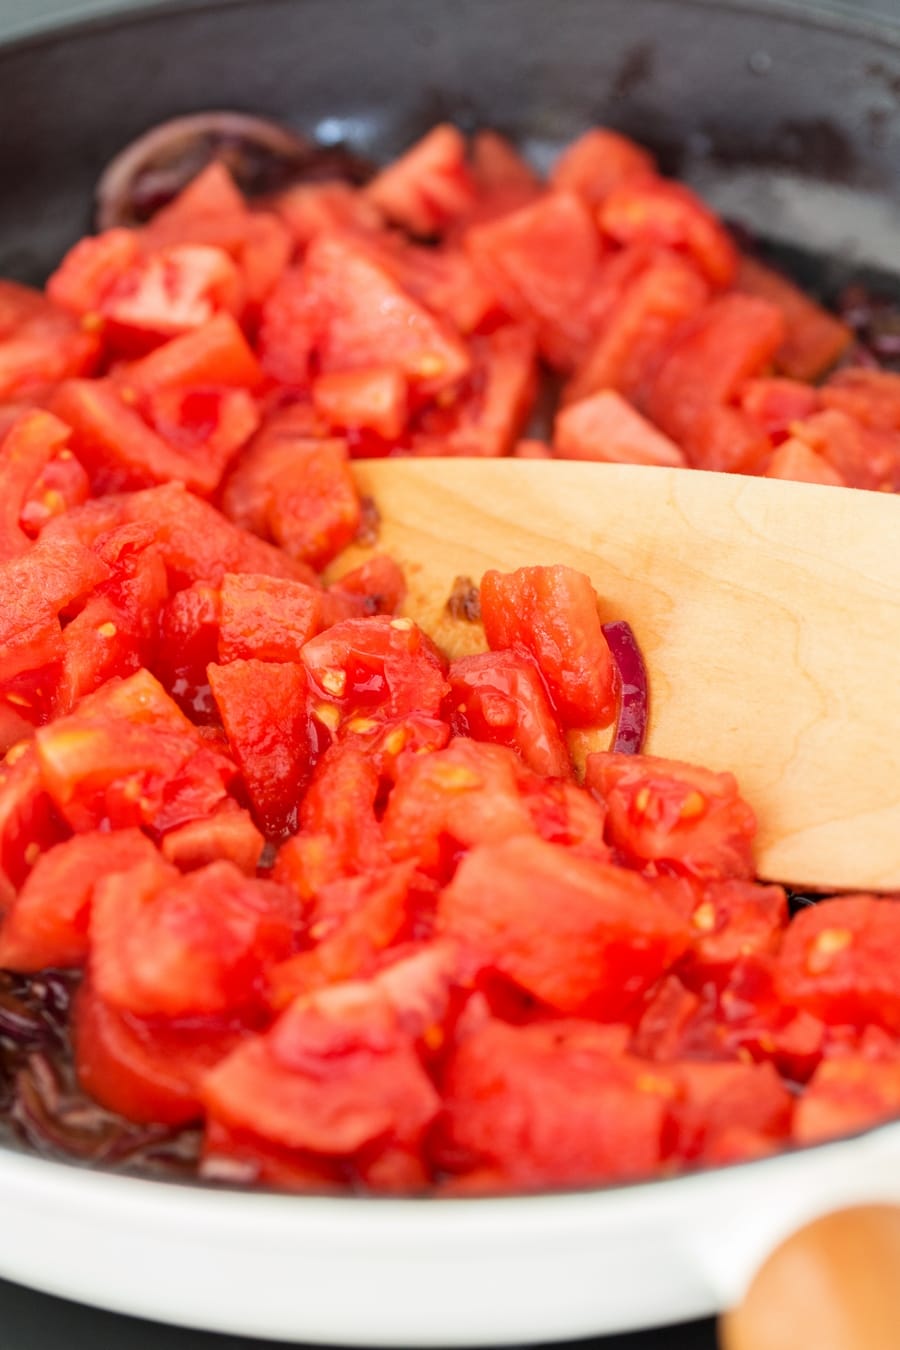 Chopped fresh tomatoes added to red onion soffritto.